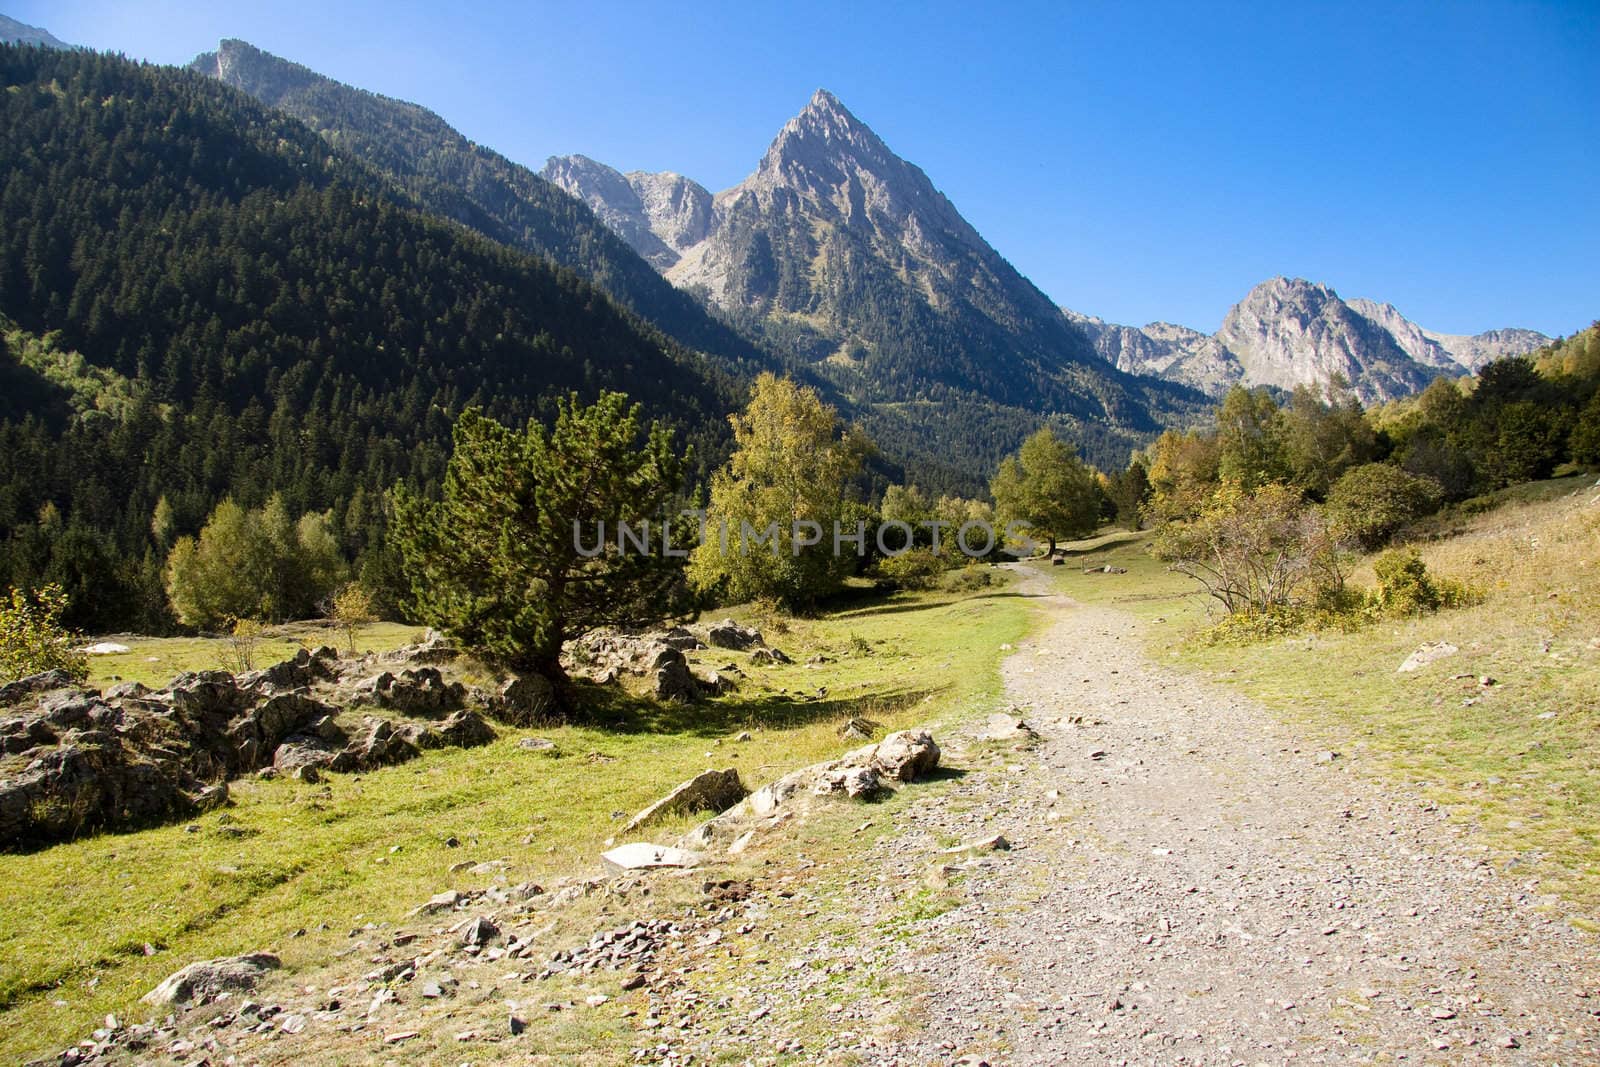 Path to Sant Maurici lake in Aiguestortes National Park - Pyrenees, Spain.